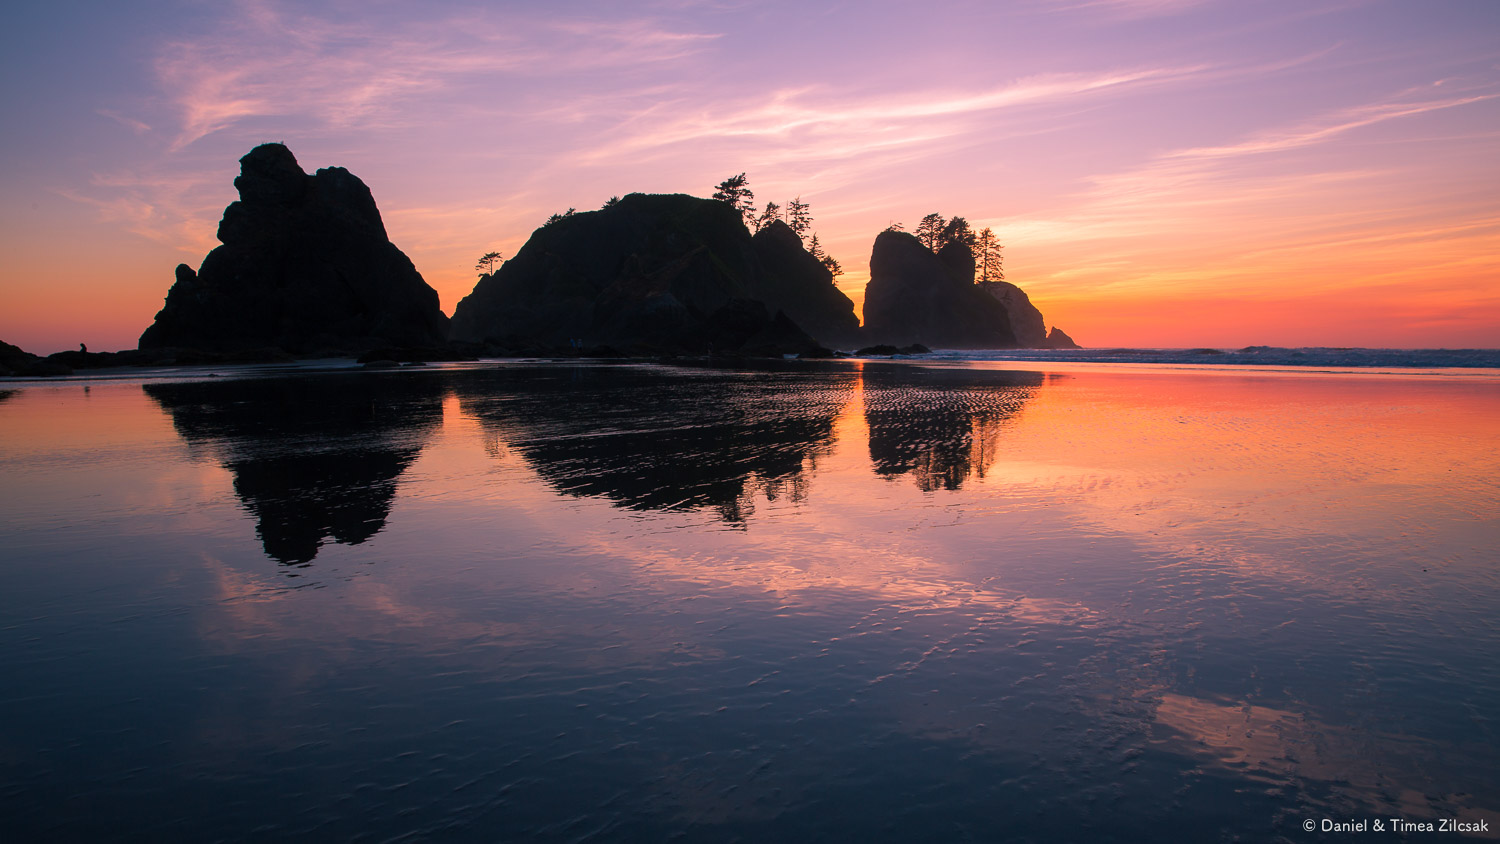 Spectacular sunset at Shi Shi Beach and Point of the Arches, Oly